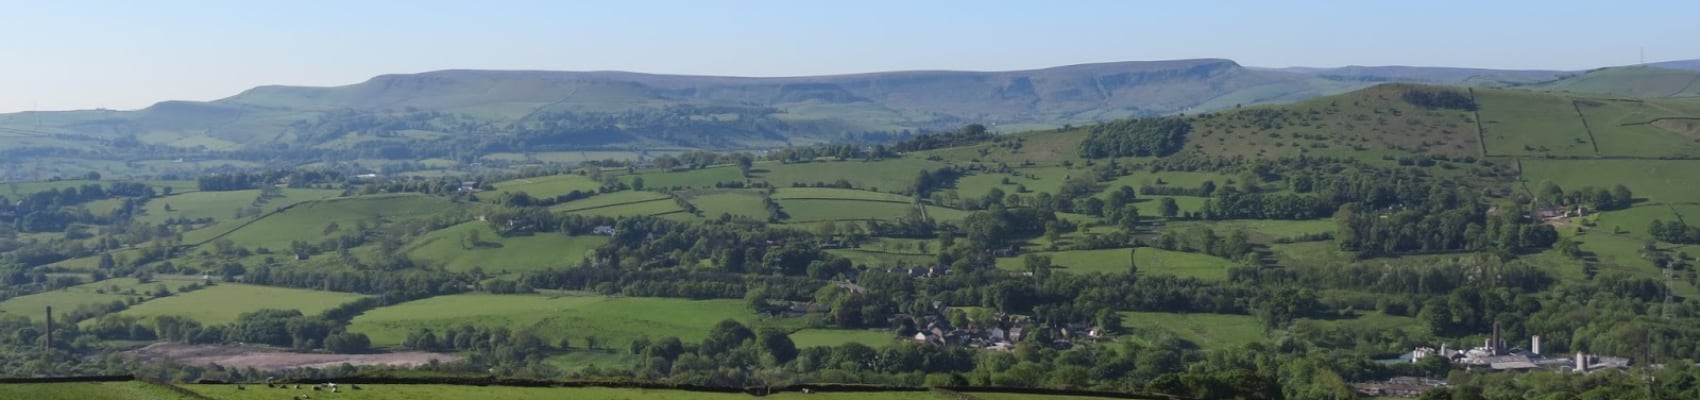 photo of countyside in derbyshire